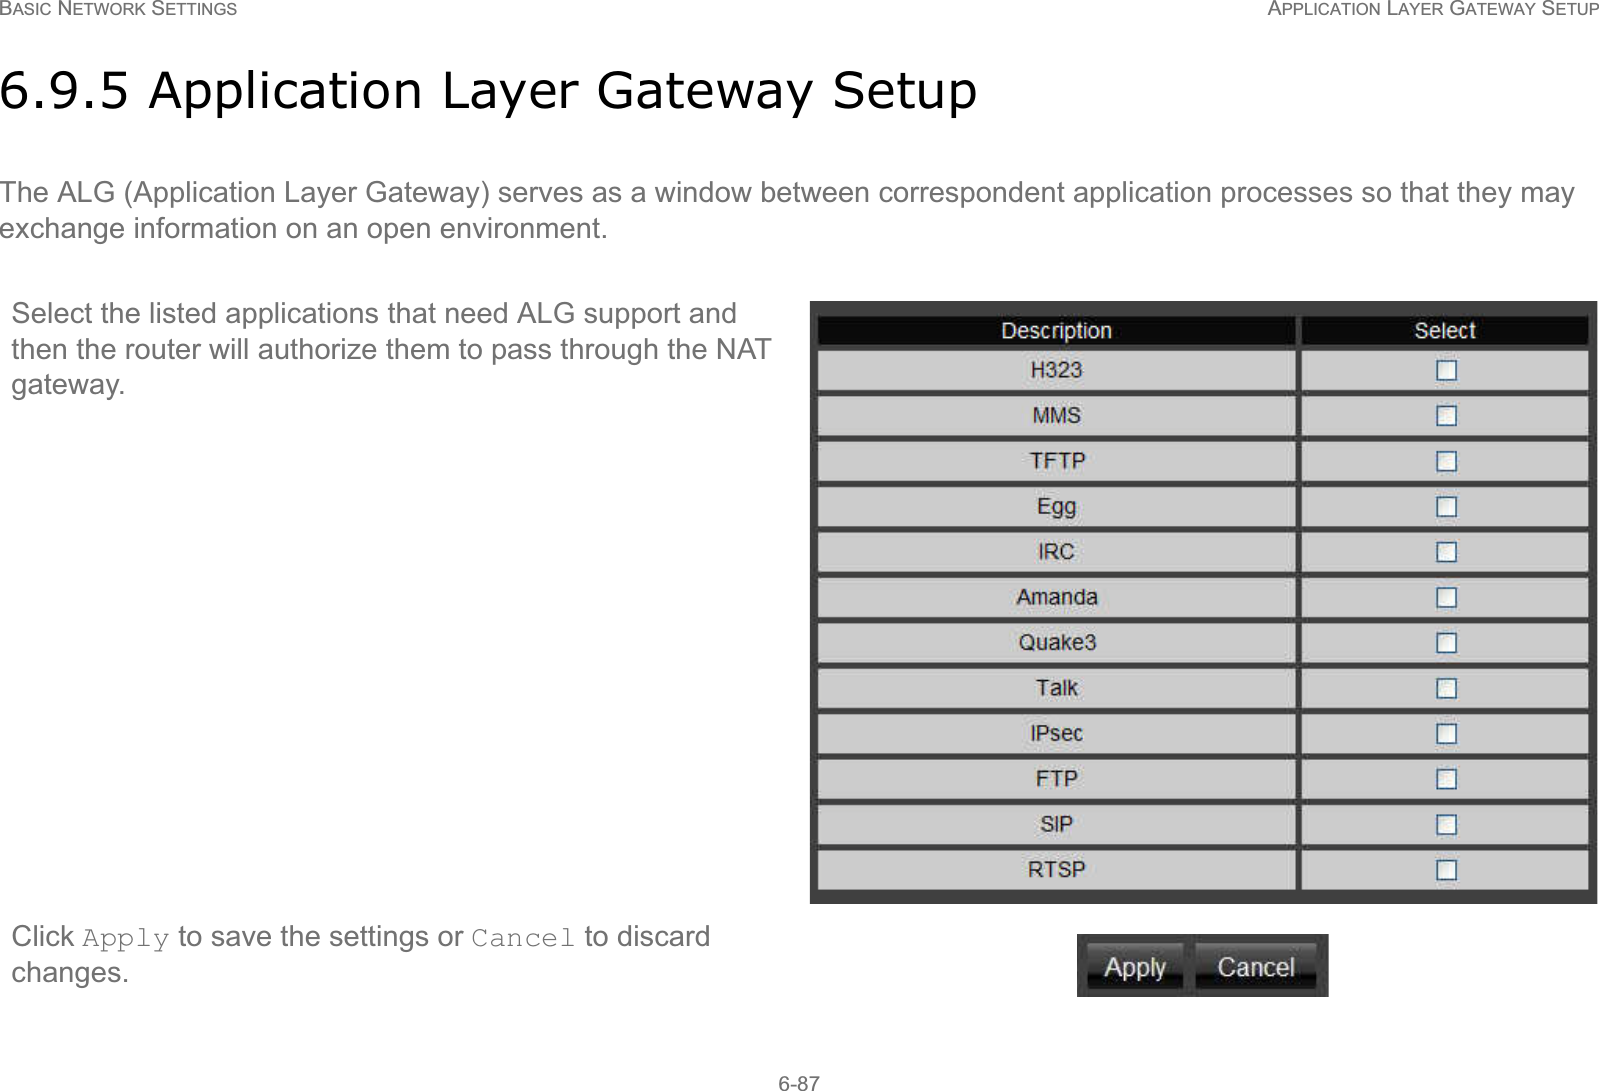 BASIC NETWORK SETTINGS APPLICATION LAYER GATEWAY SETUP6-876.9.5 Application Layer Gateway SetupThe ALG (Application Layer Gateway) serves as a window between correspondent application processes so that they may exchange information on an open environment.Select the listed applications that need ALG support and then the router will authorize them to pass through the NAT gateway.Click Apply to save the settings or Cancel to discard changes.